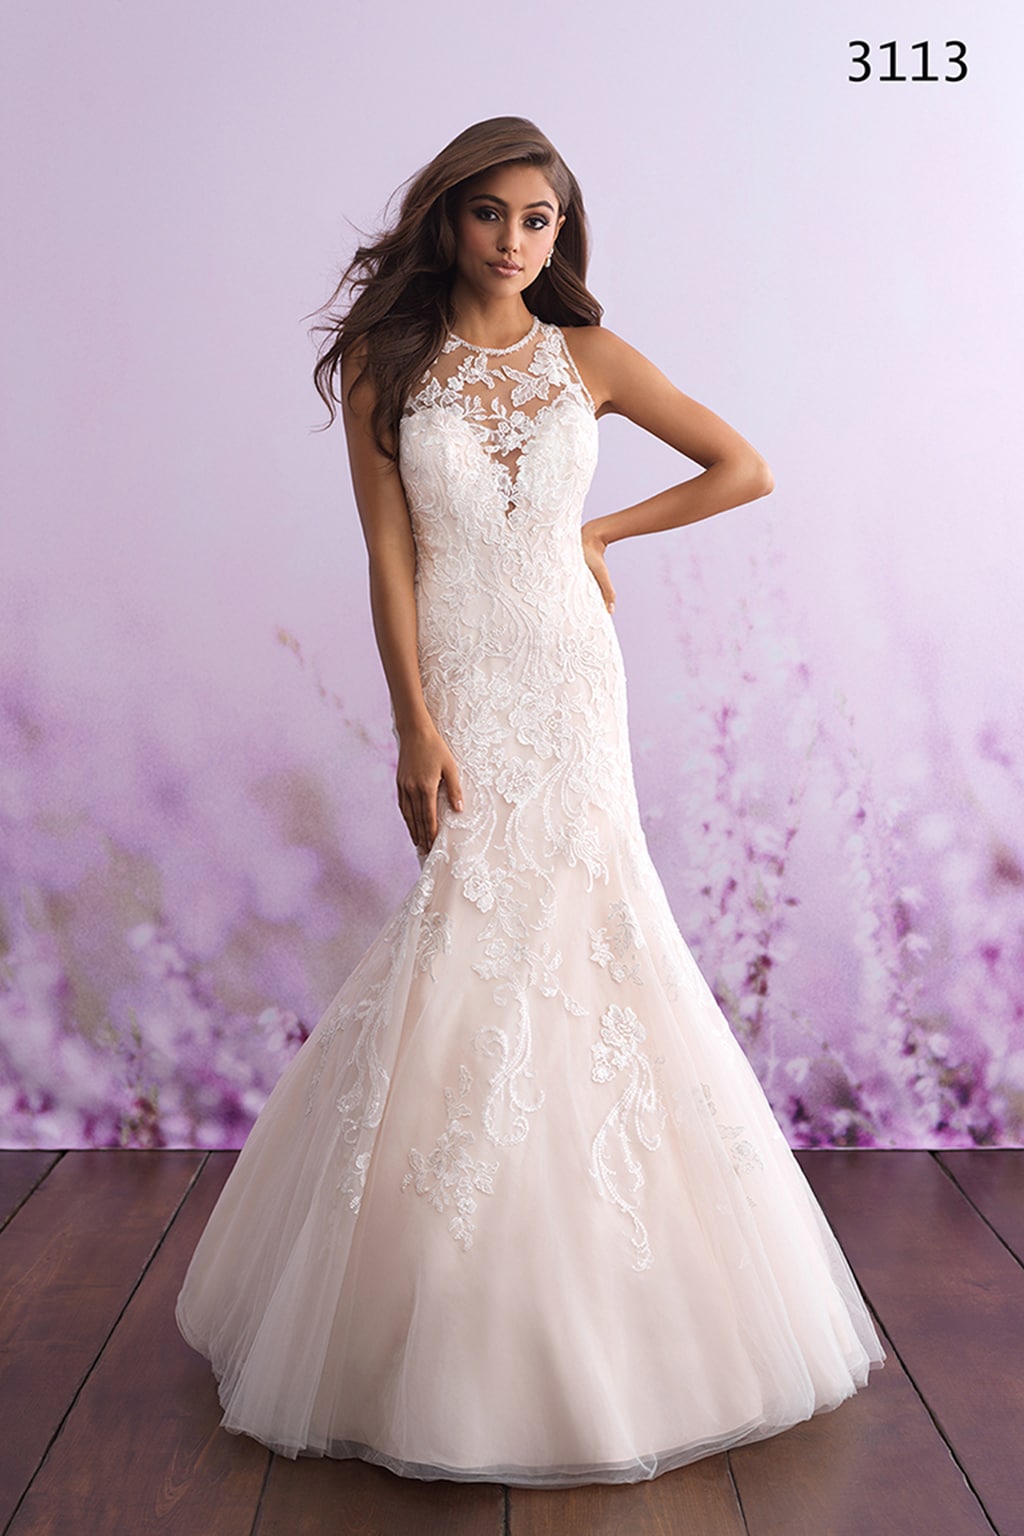 Wedding Dresses in Manchester at Discount Prices Bride